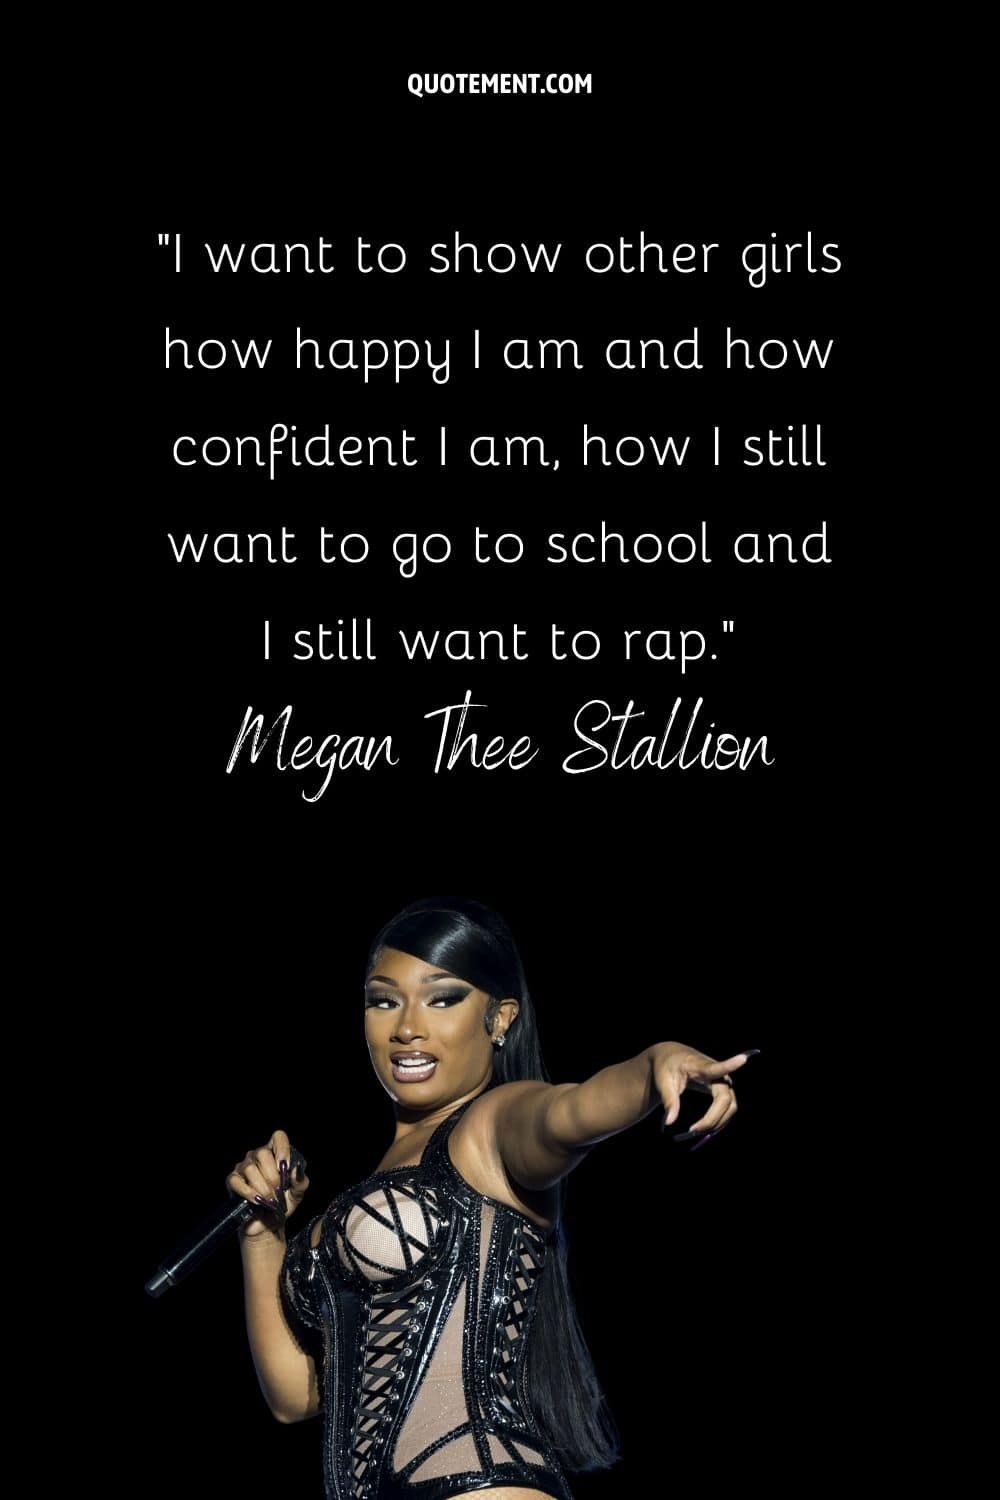 “I want to show other girls how happy I am and how confident I am, how I still want to go to school and I still want to rap.” — Megan Thee Stallion